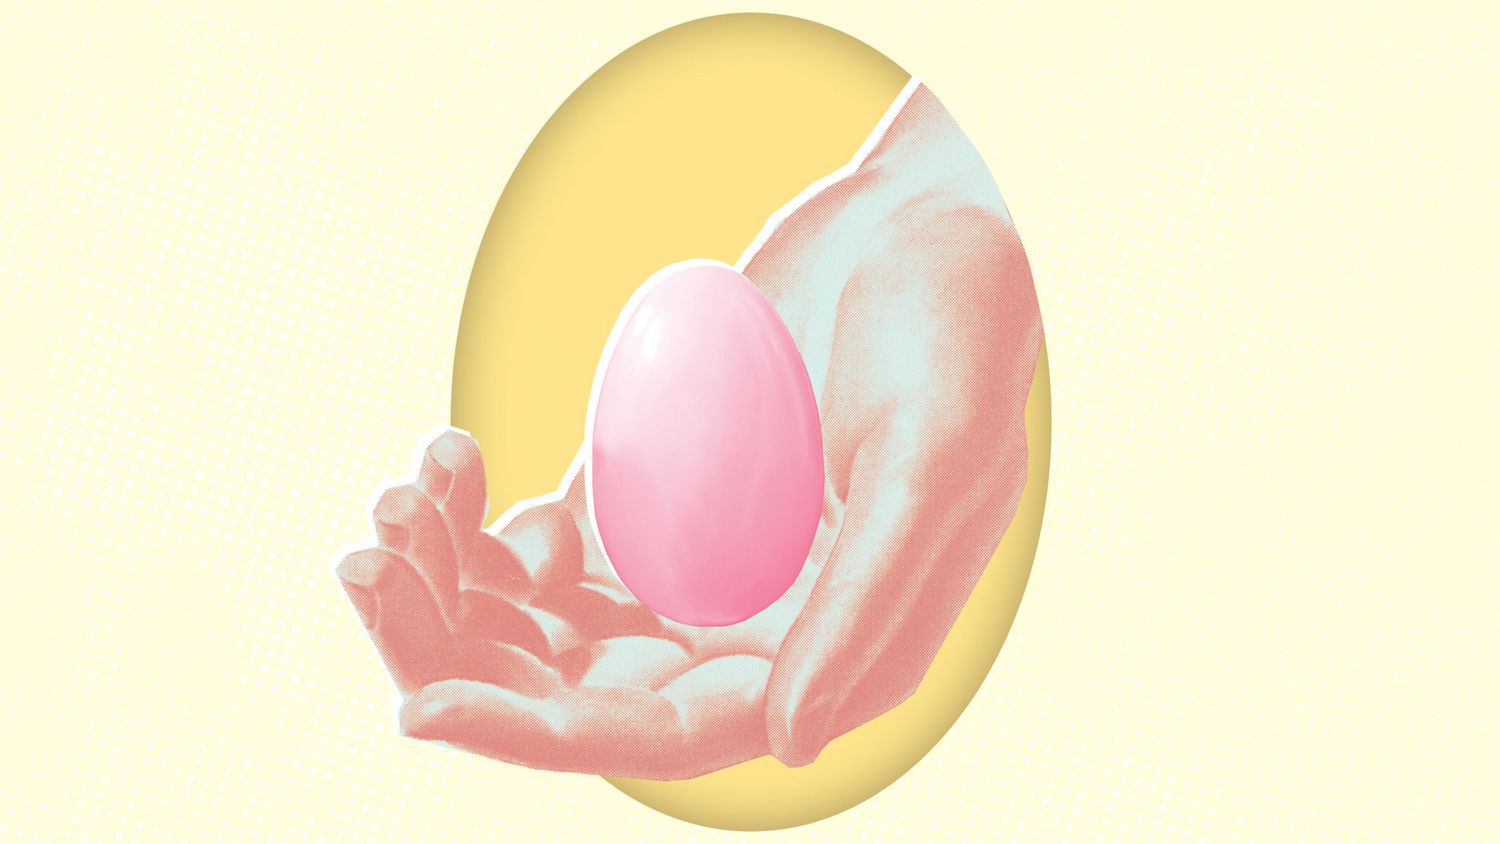 amith silva recommends easter egg in pussy pic